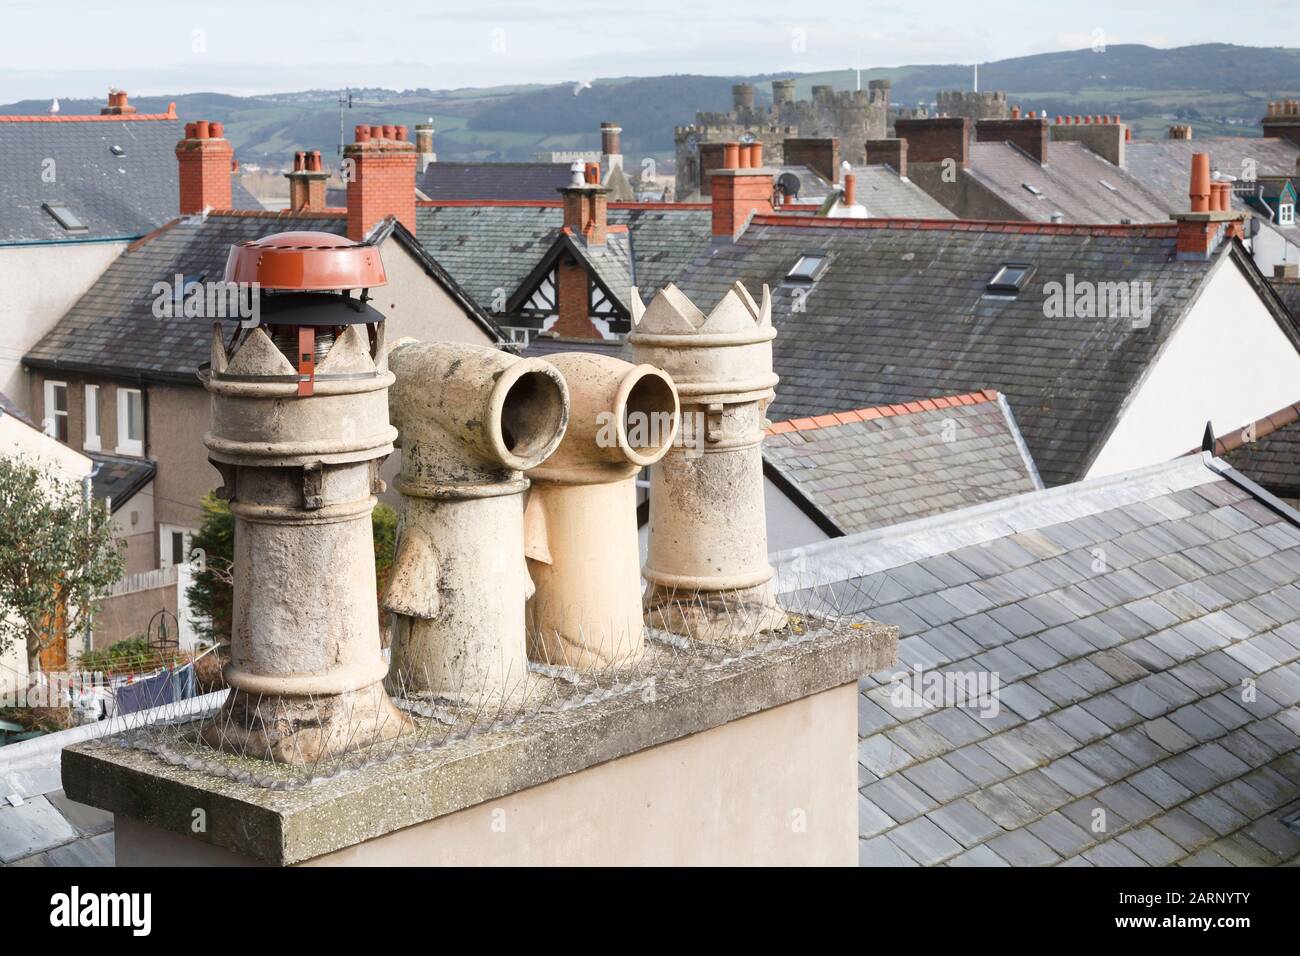 Chimney pots and roof tops in a typical Welsh town in the UK. With ornate Victorian cowls. Conwy, Wales Stock Photo